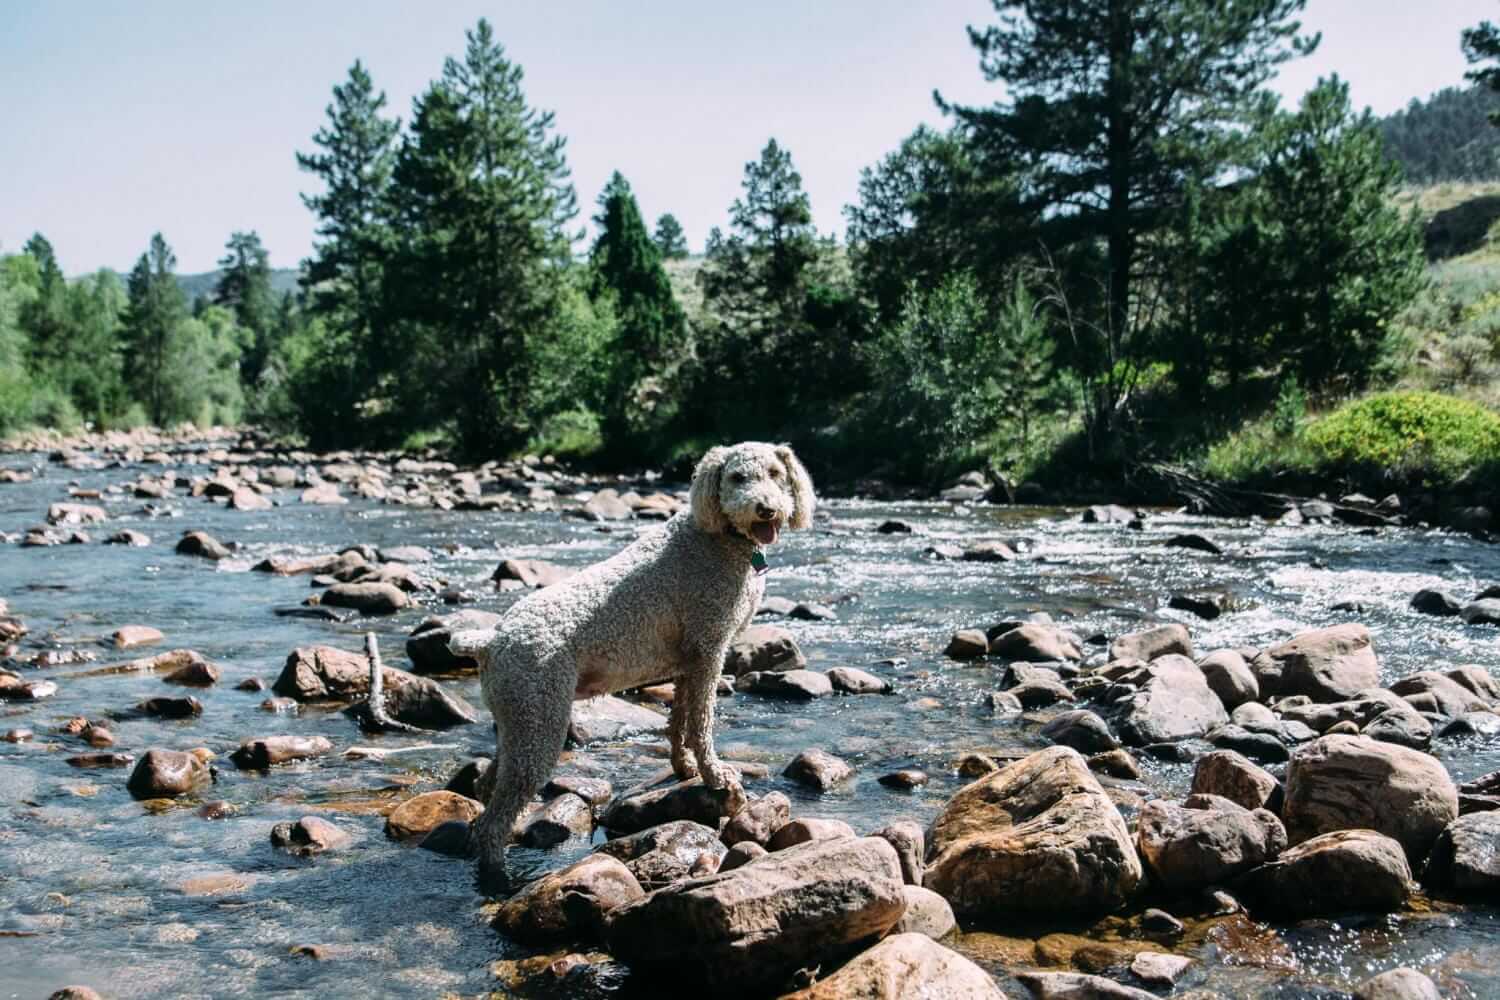 Standard Poodle standing on stones in river